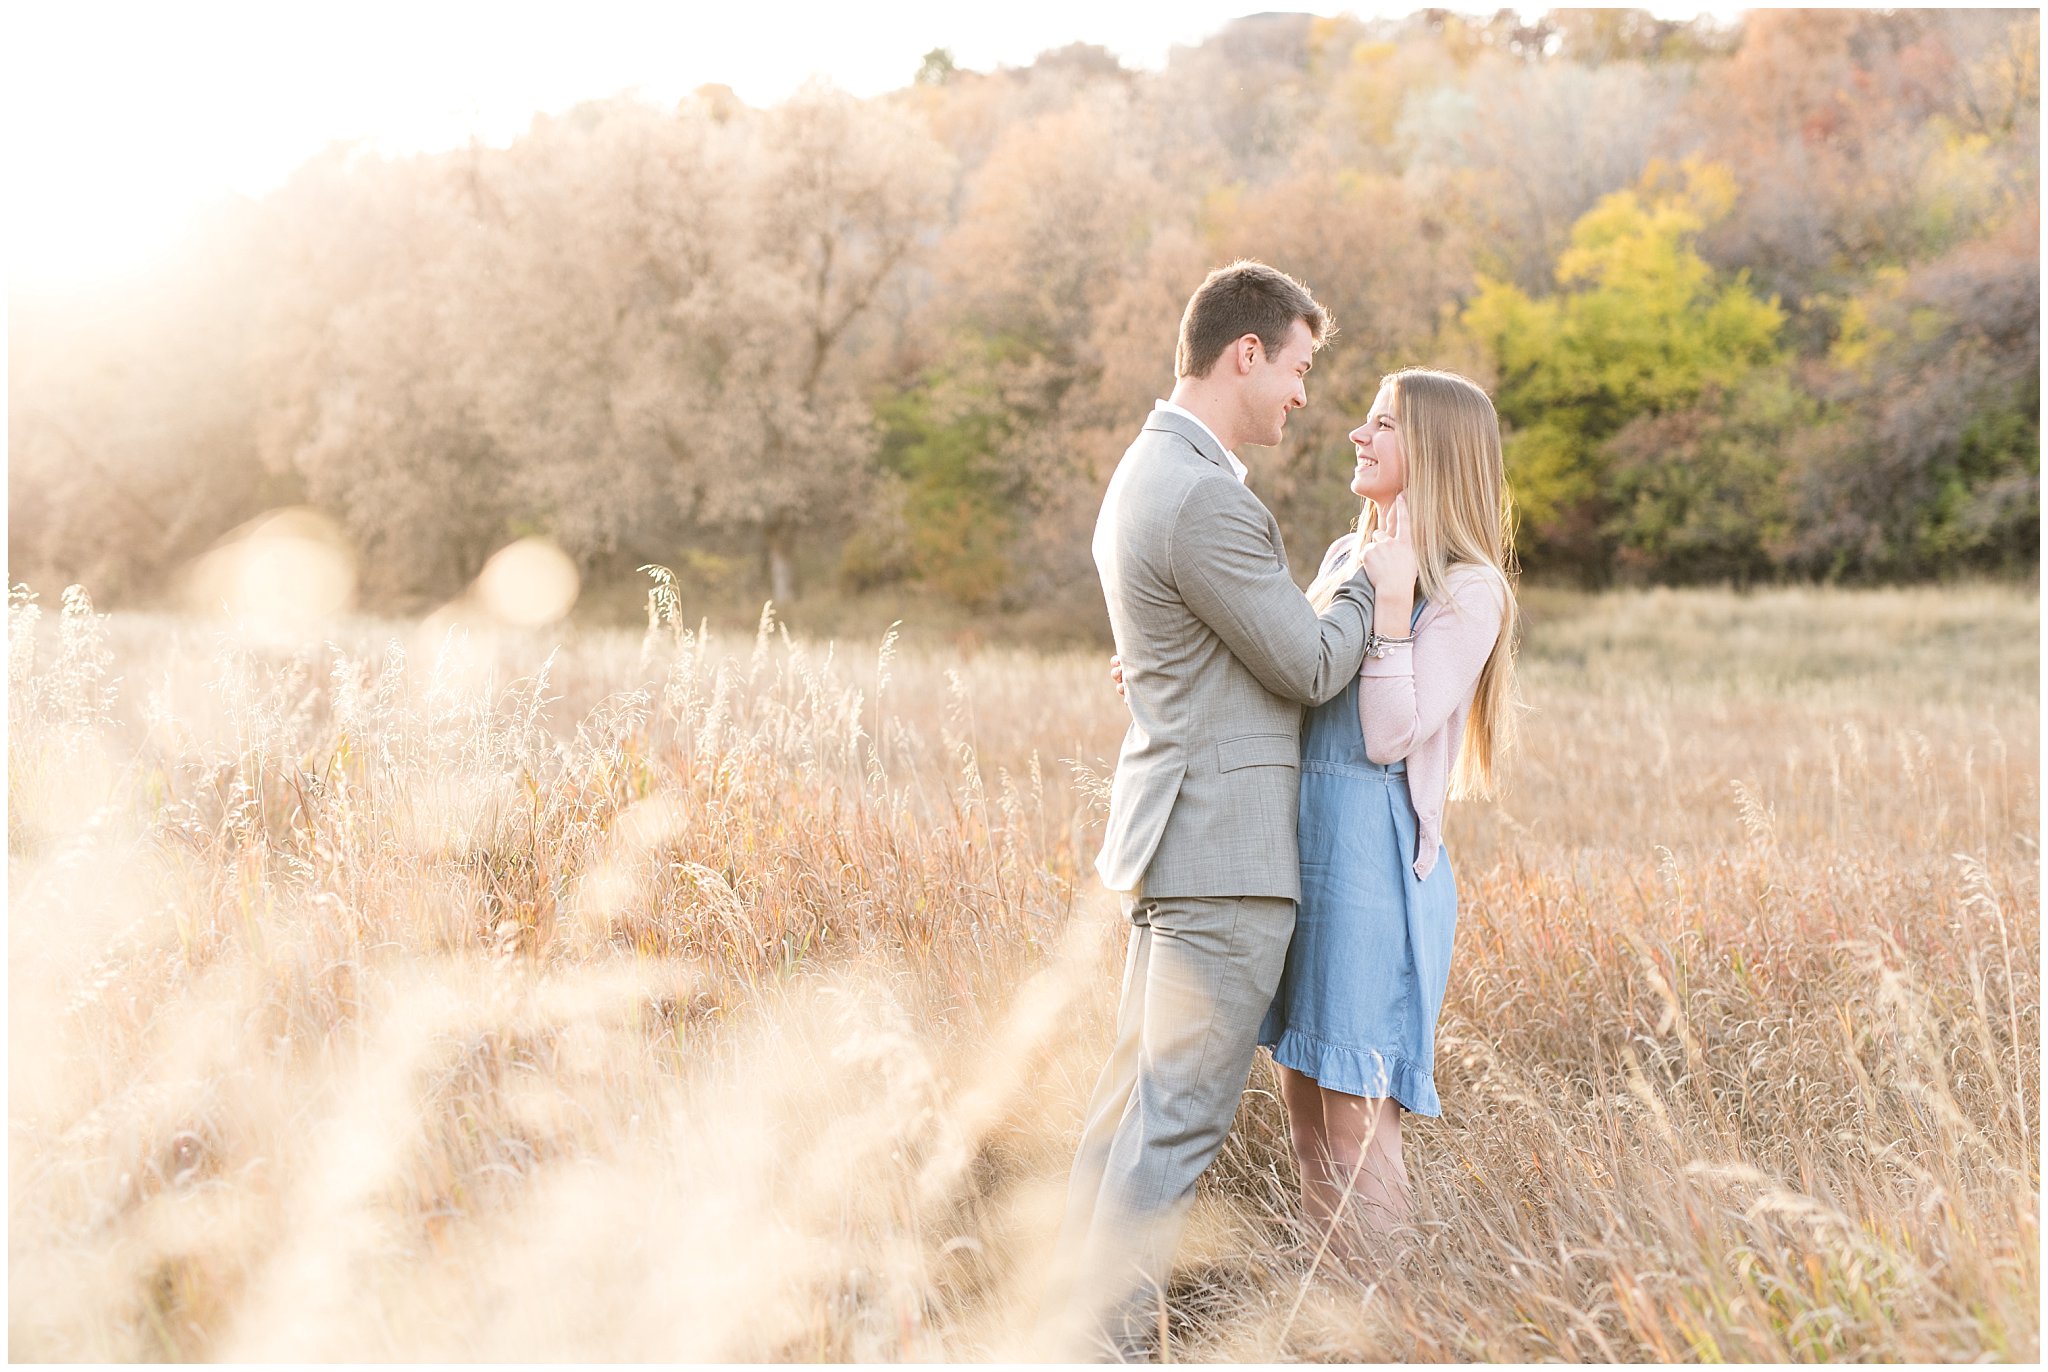 Utah Fall Engagement | Couple embracing in a field | Jessie and Dallin Photography